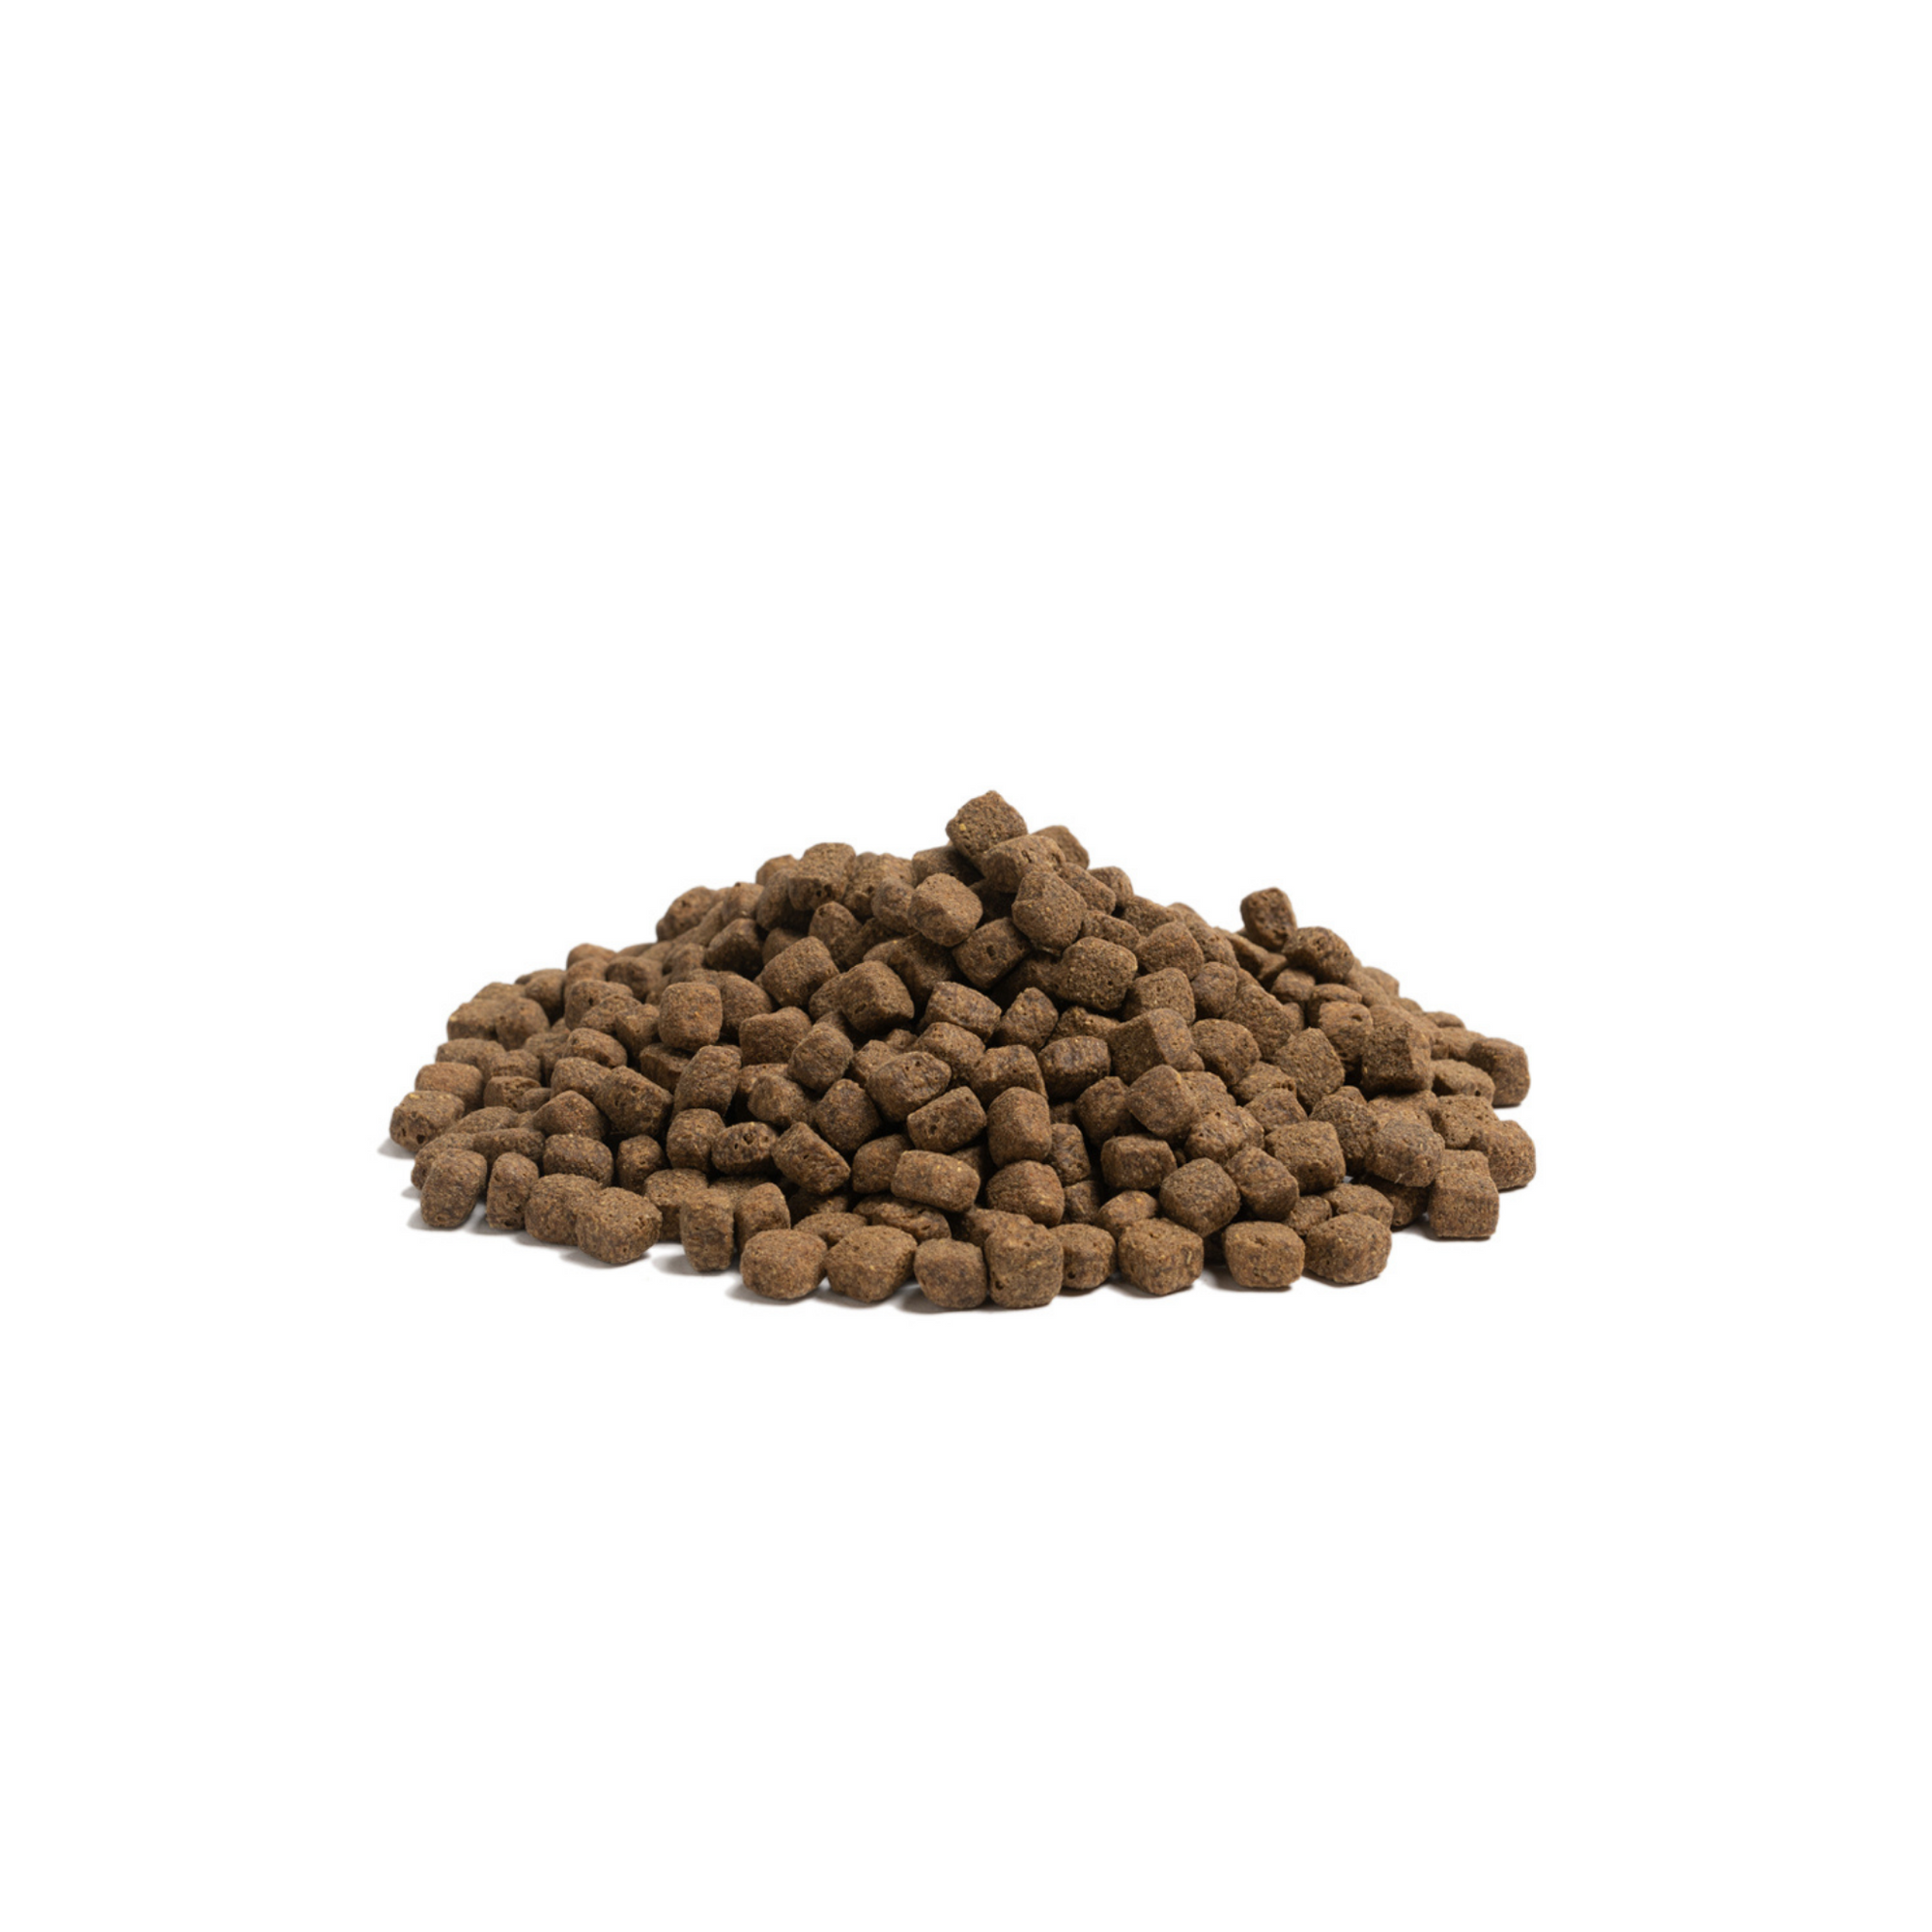 High-quality grainless weight control food for adult small breed dogs up to 15kg CONTOUR with 78% meat content